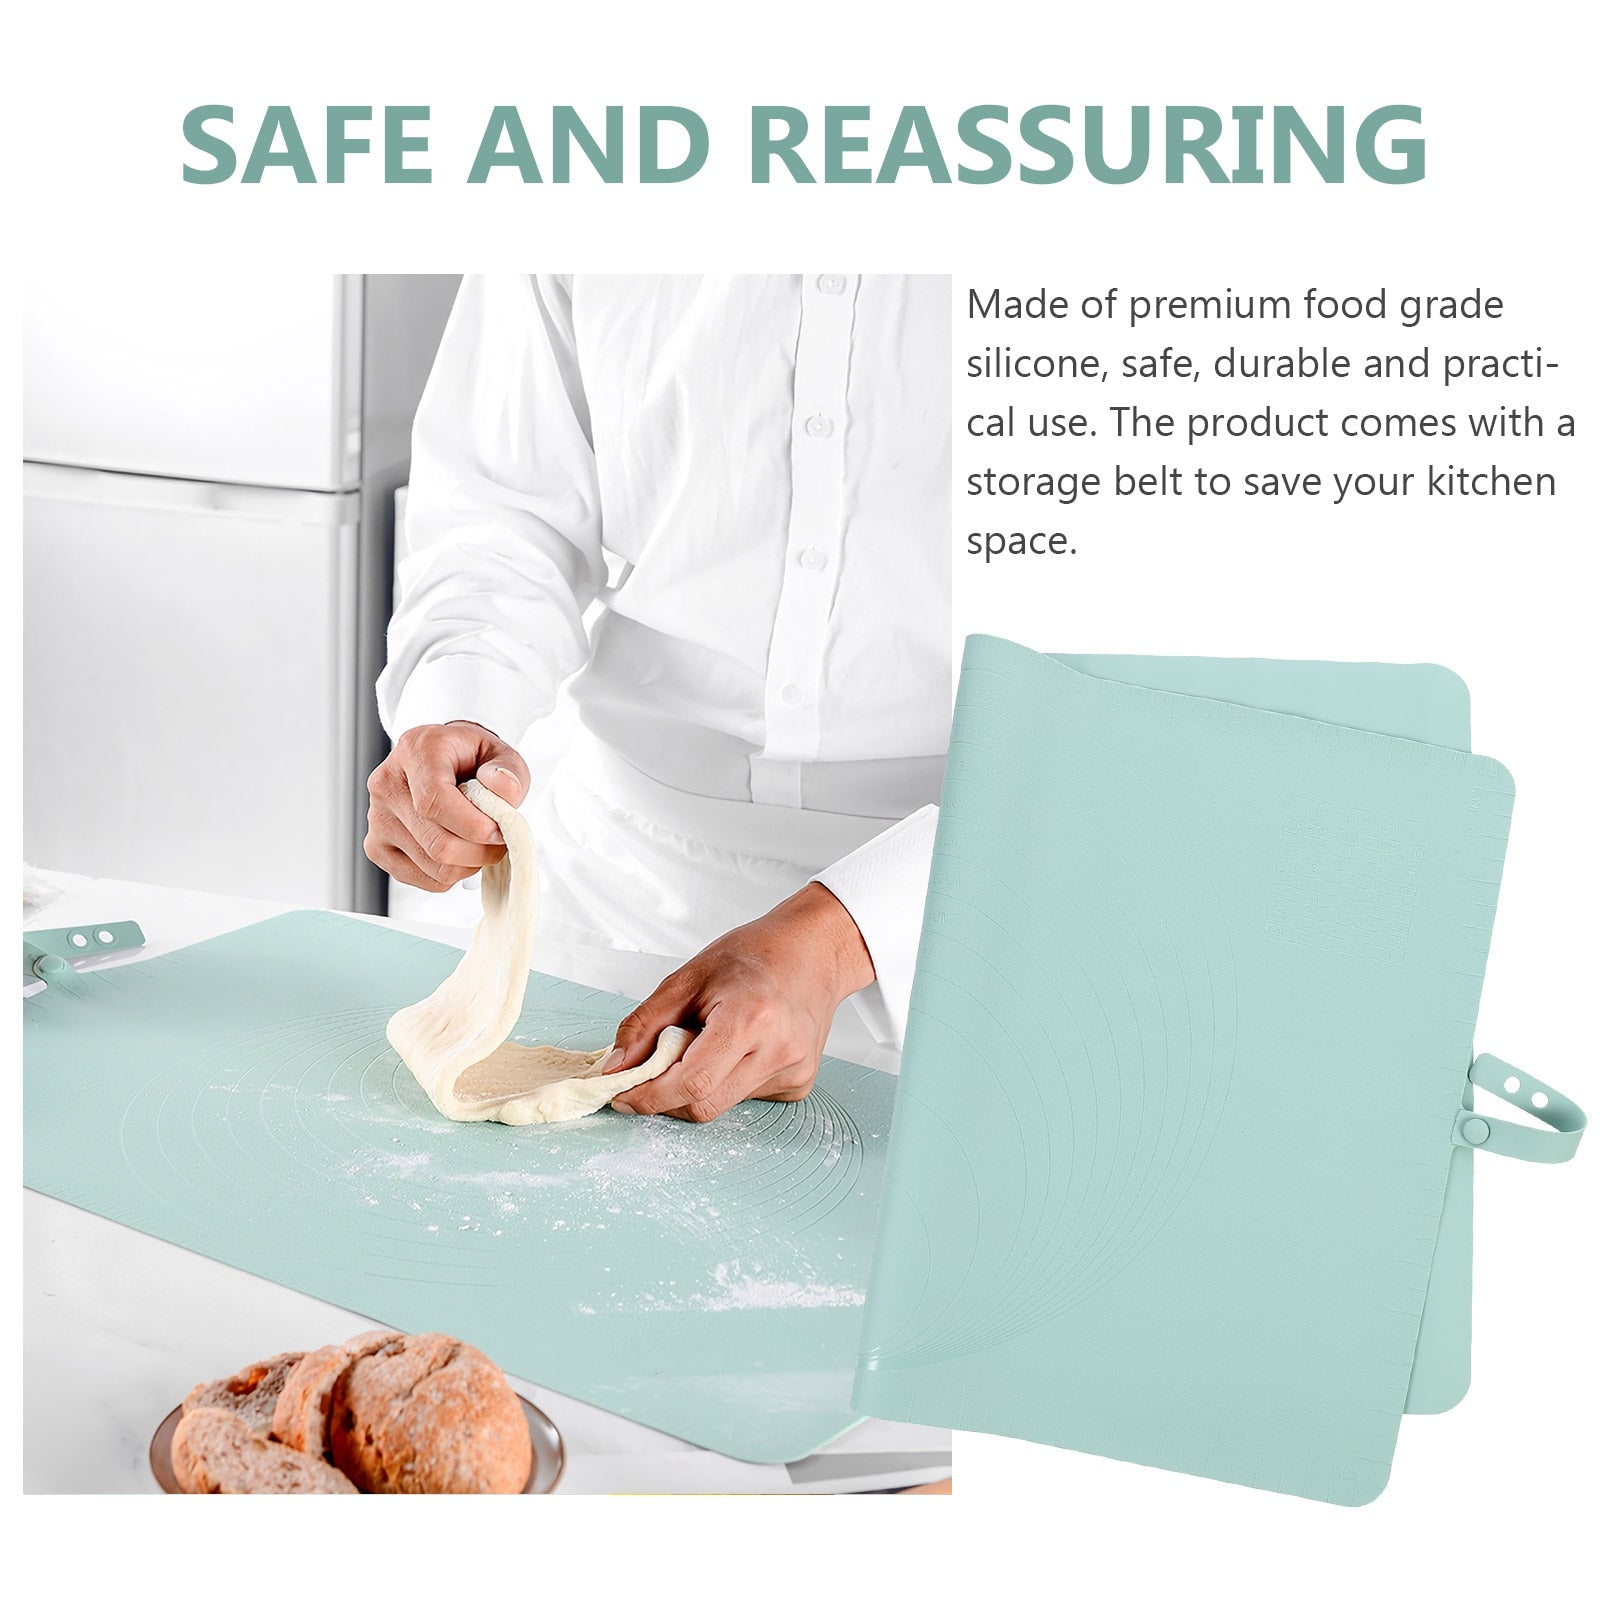 🔥LAST DAY PROMOTION 50% OFF💥EXTRA LARGE KITCHEN SILICONE PAD